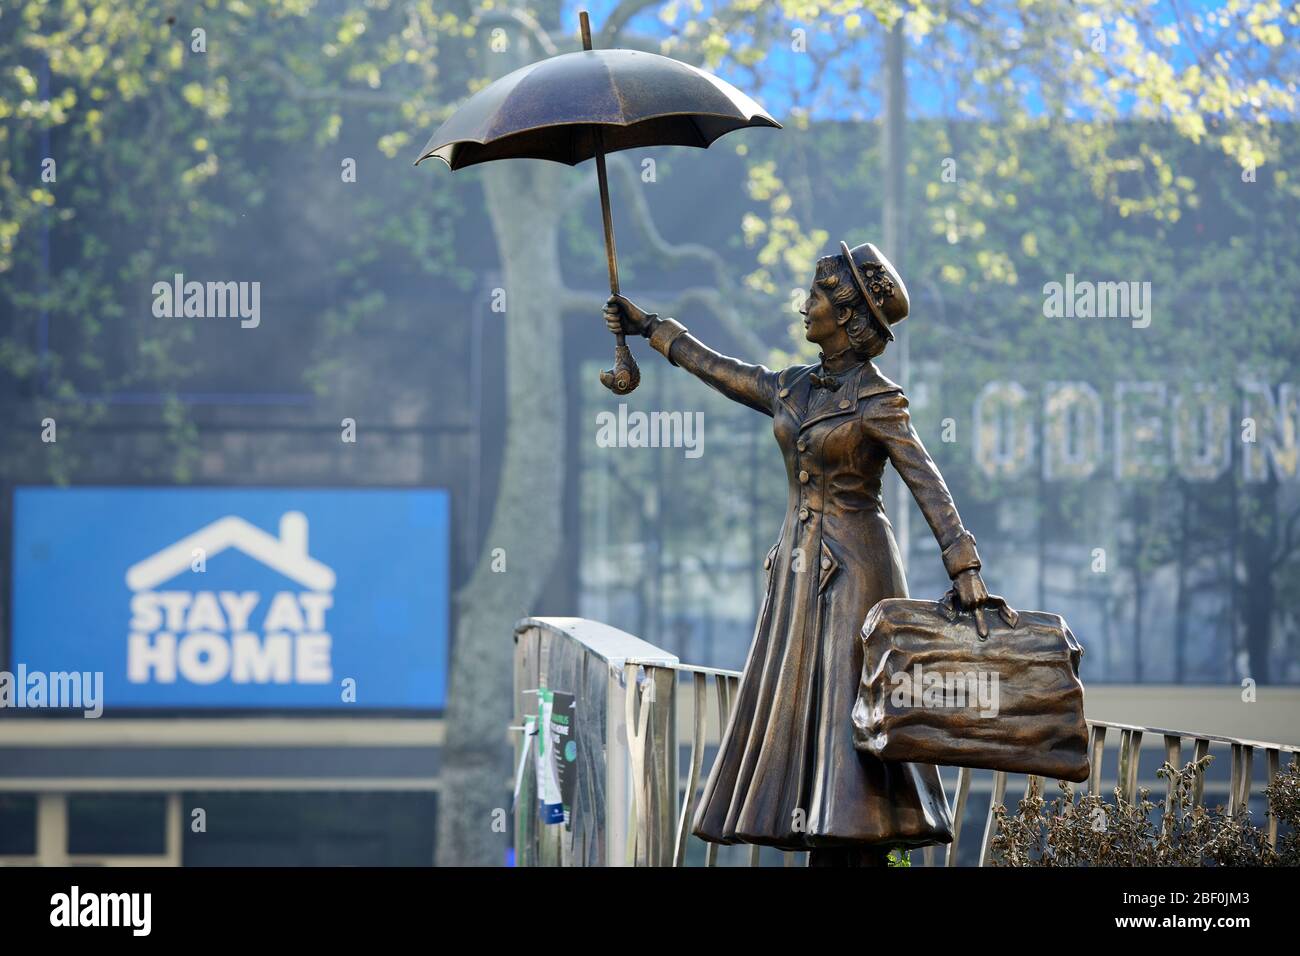 London, U.K. - 16 Apr 2020: A statue of Mary Poppins at Leicester Square, in front of a sign telling people to stay at home during the Covid-19 coronavirus pandemic lockdown. Stock Photo